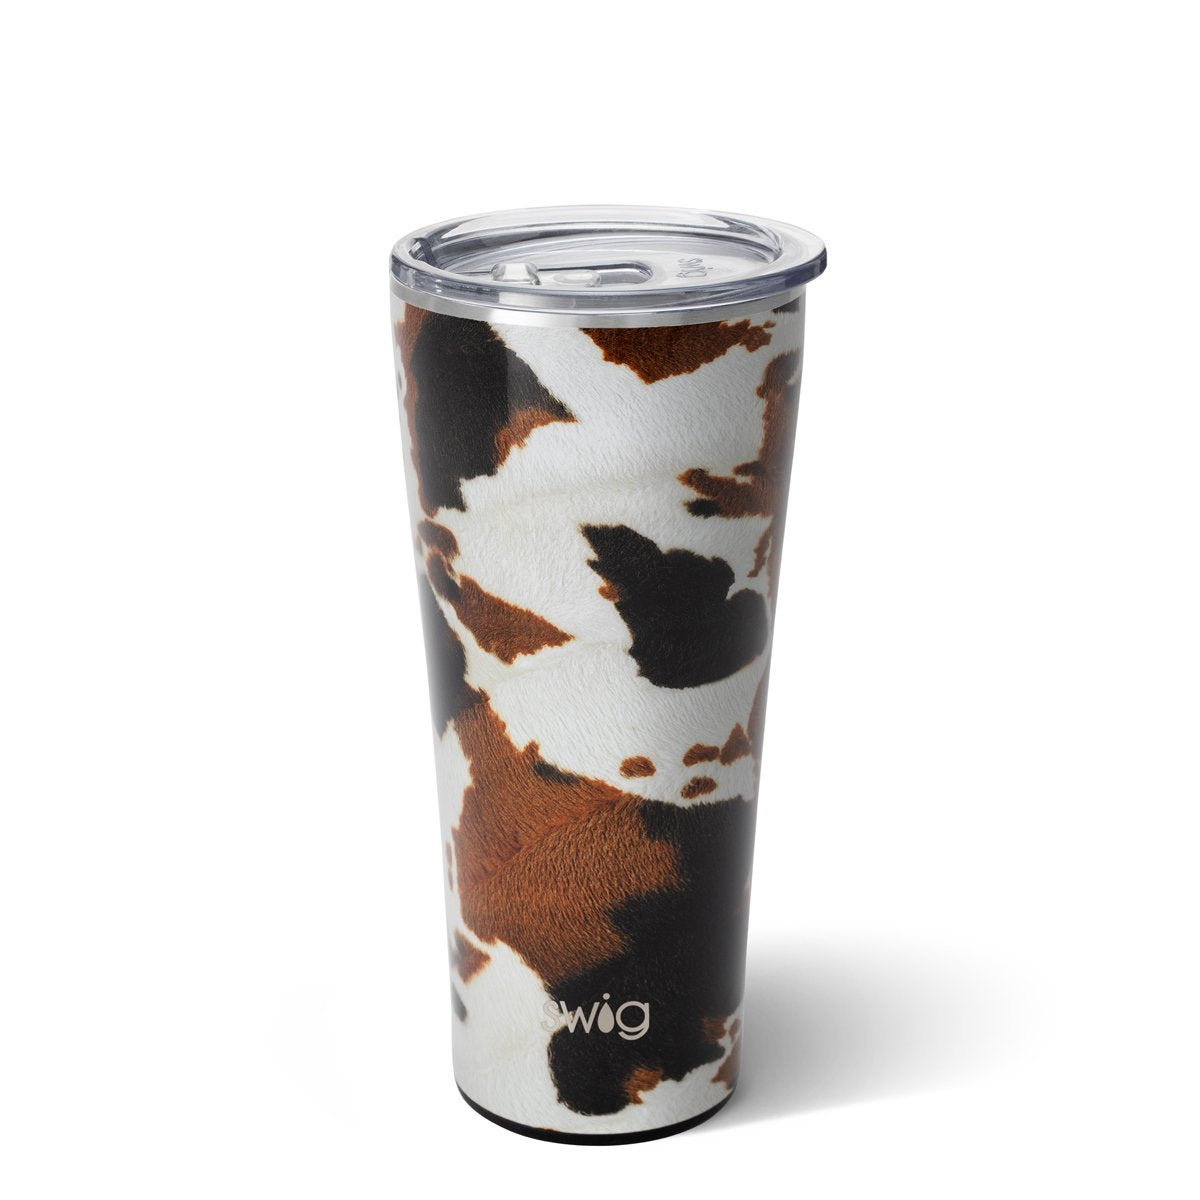 Paradise 32 oz Swig Tumbler – Calligraphy Creations In KY